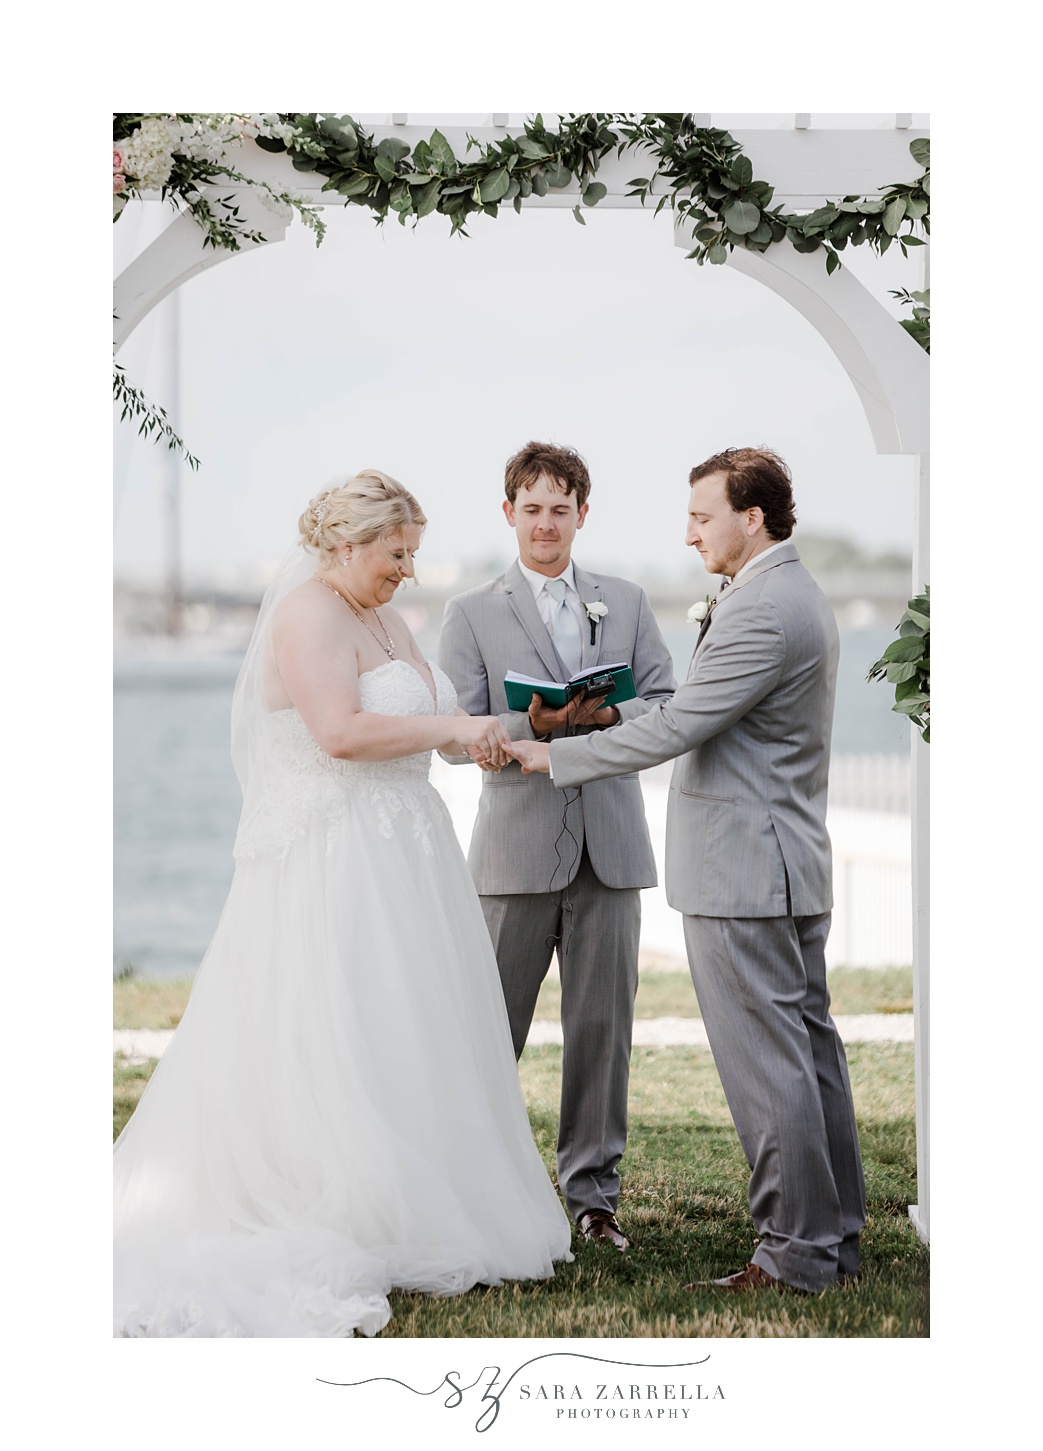 newlyweds exchange rings during ceremony in Rhode Island